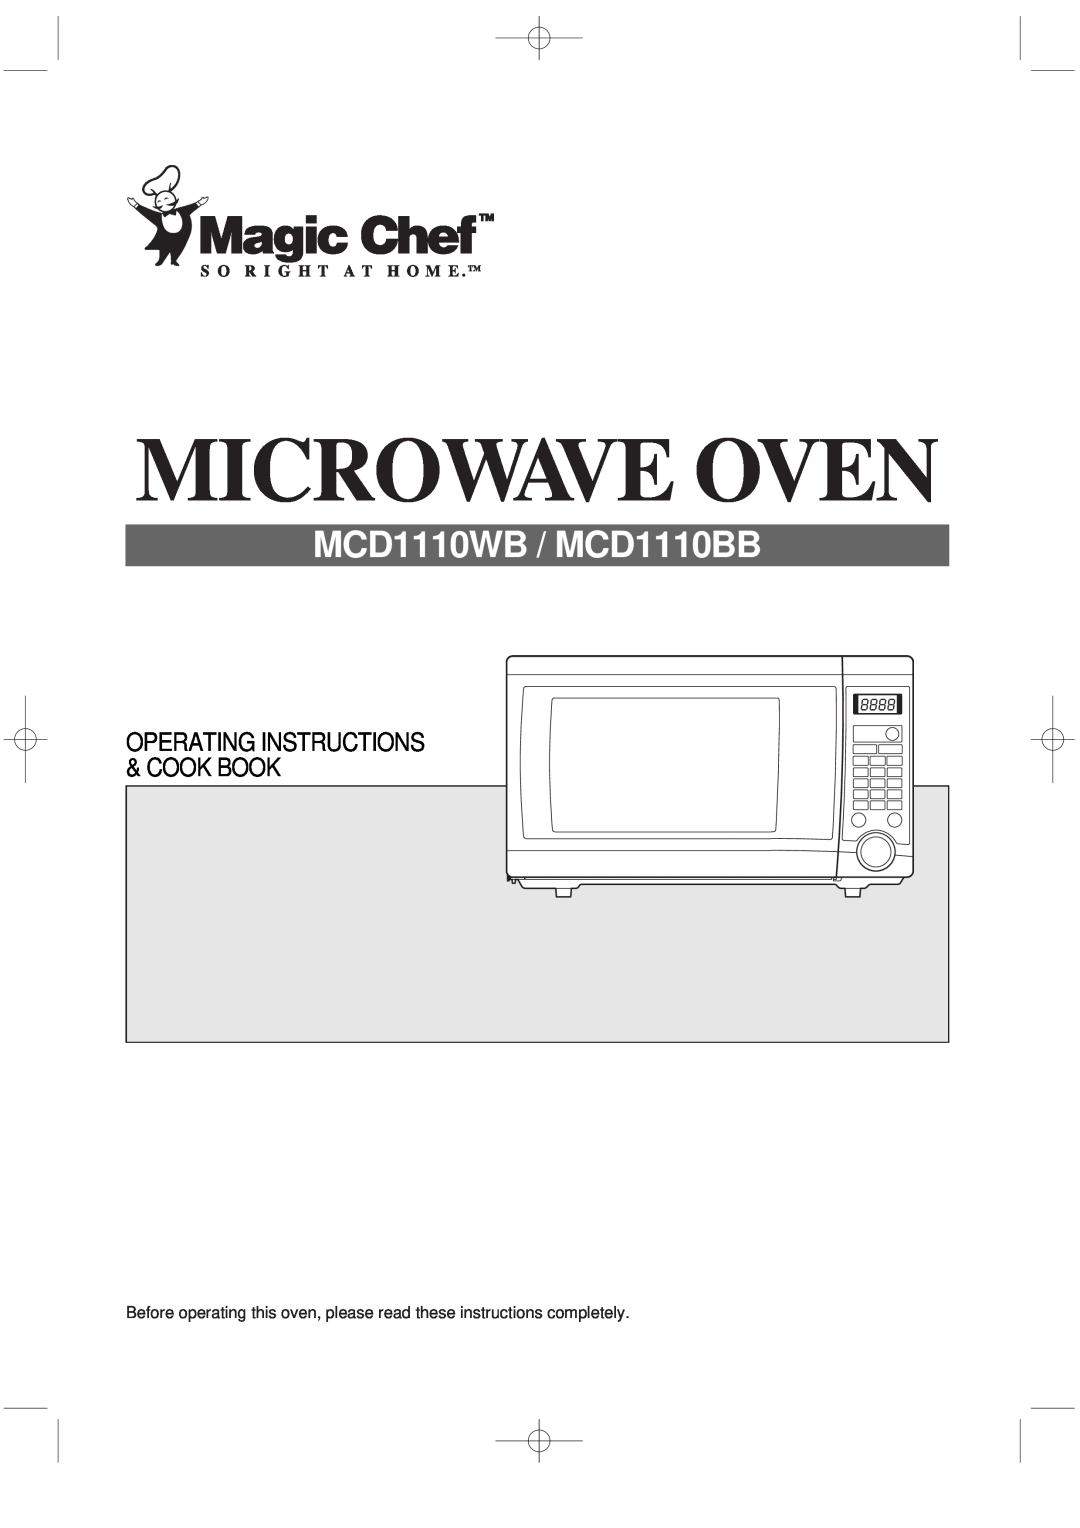 Magic Chef manual Microwave Oven, MCD1110WB / MCD1110BB, Operating Instructions & Cook Book 